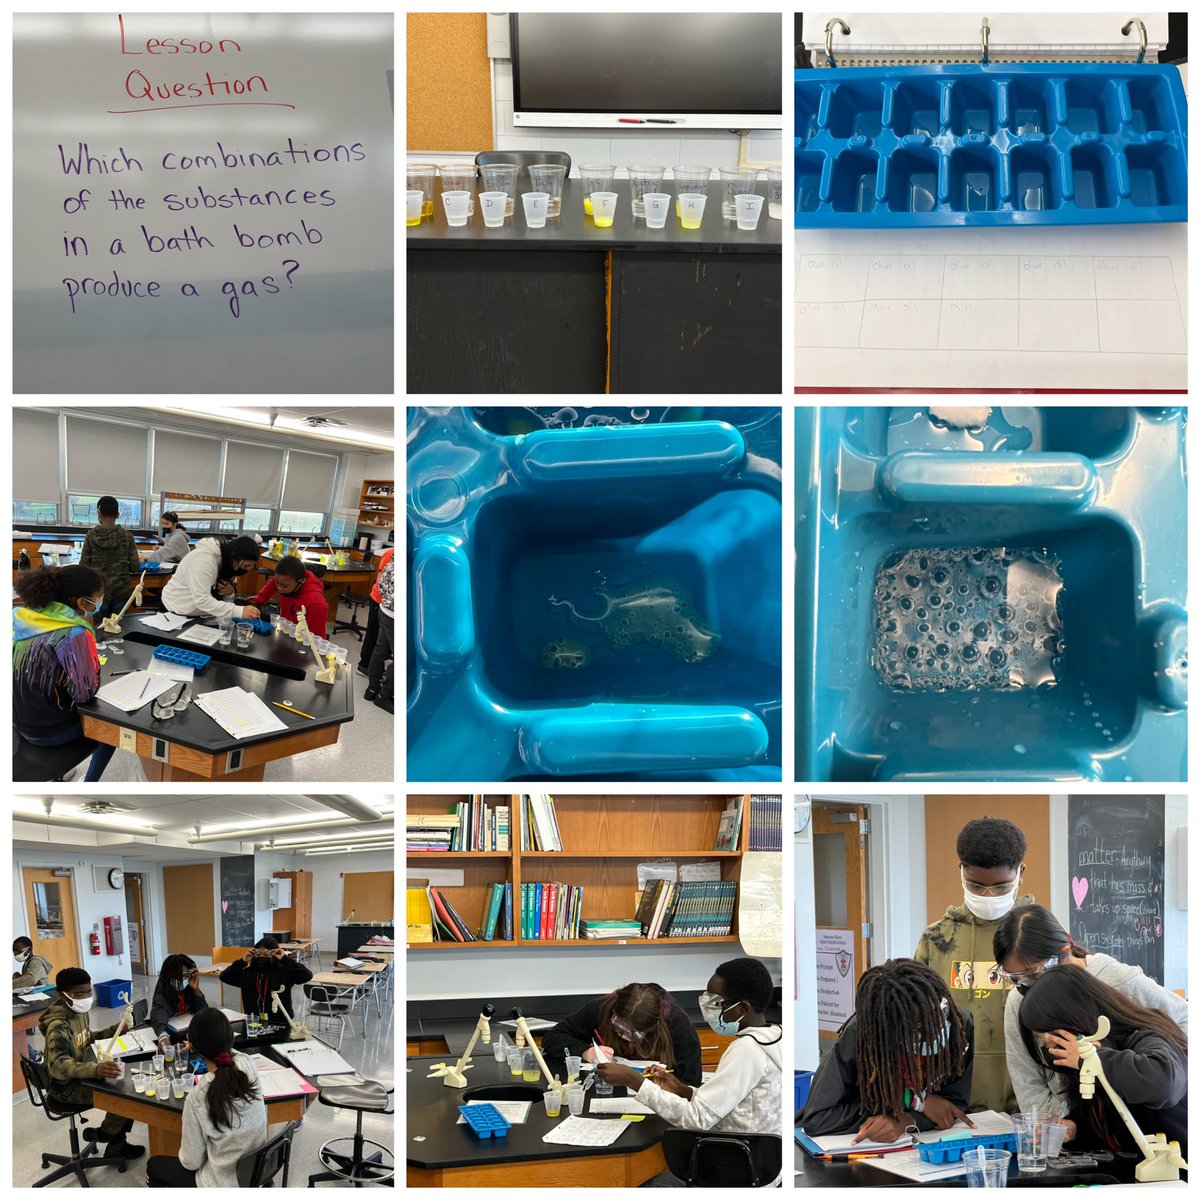 What combinations of the substances in a bath bomb produce a gas? Magical Mrs. E’s students are in the case! @Neptune_STEM @Stacie_Ferrara @mgristina @OpenSciEd #HandsOnScience #InquiryBased #PlopPlopFizzFizz